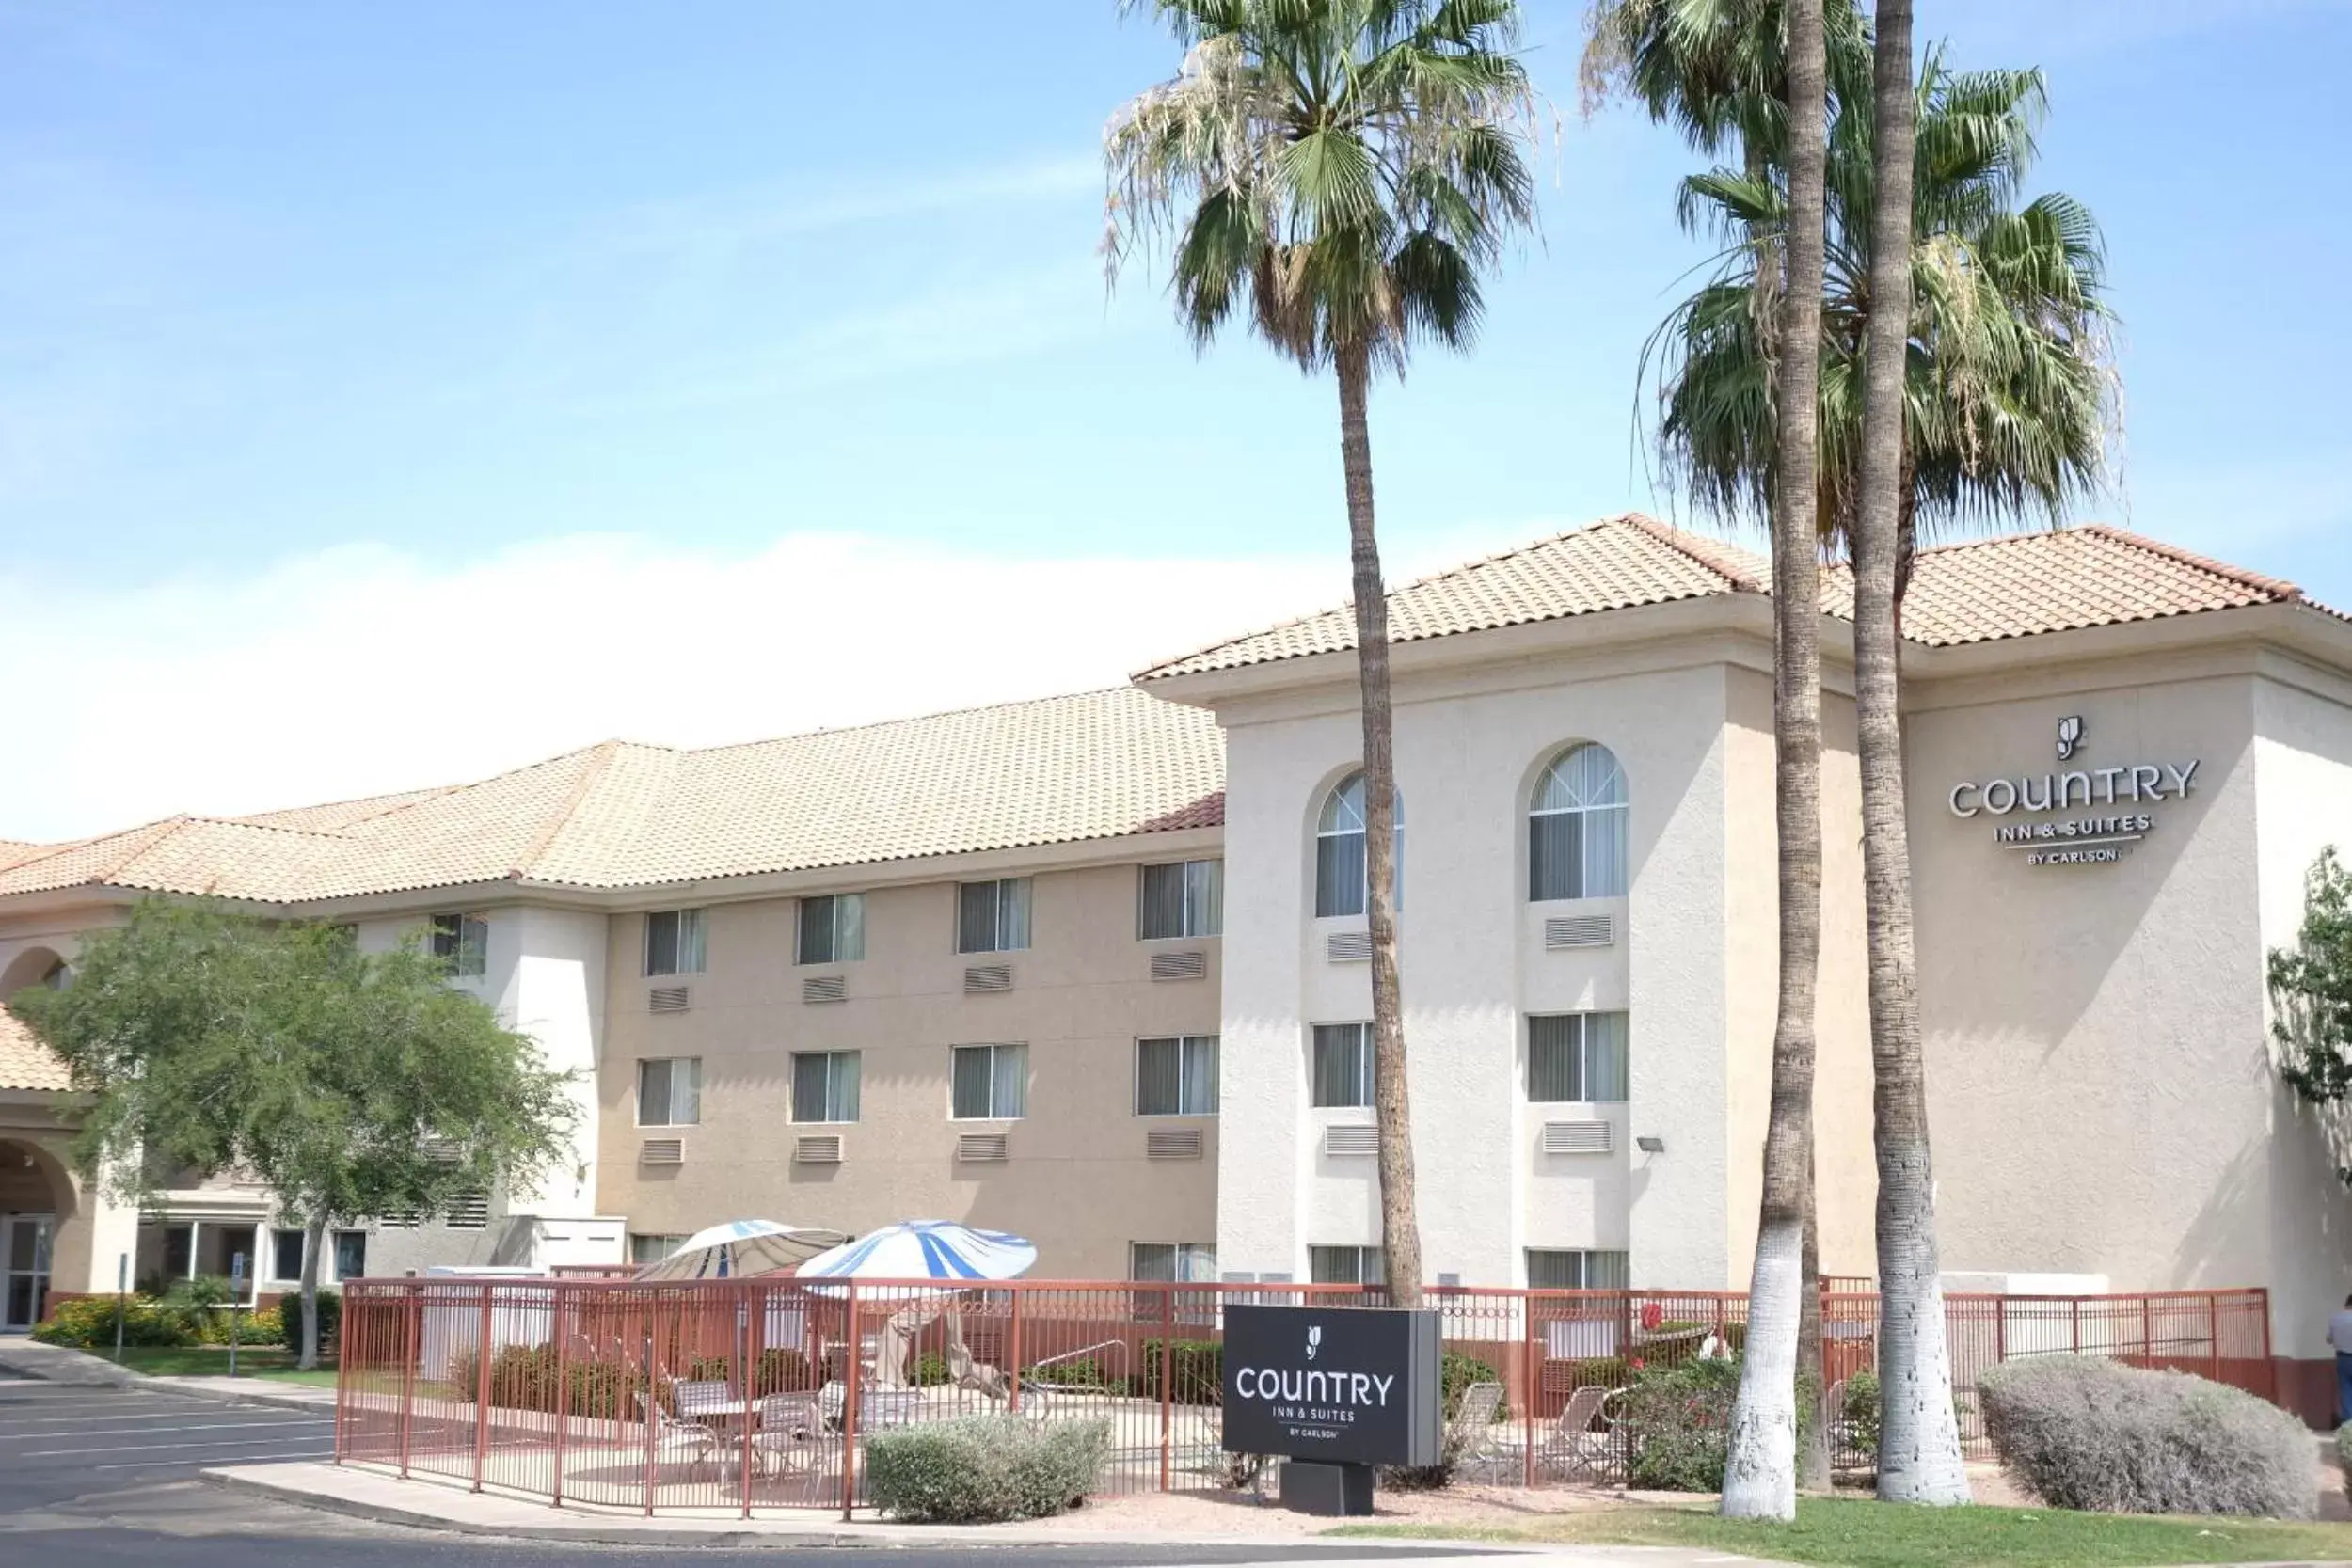 Property Building in Country Inn & Suites by Radisson, Phoenix Airport, AZ